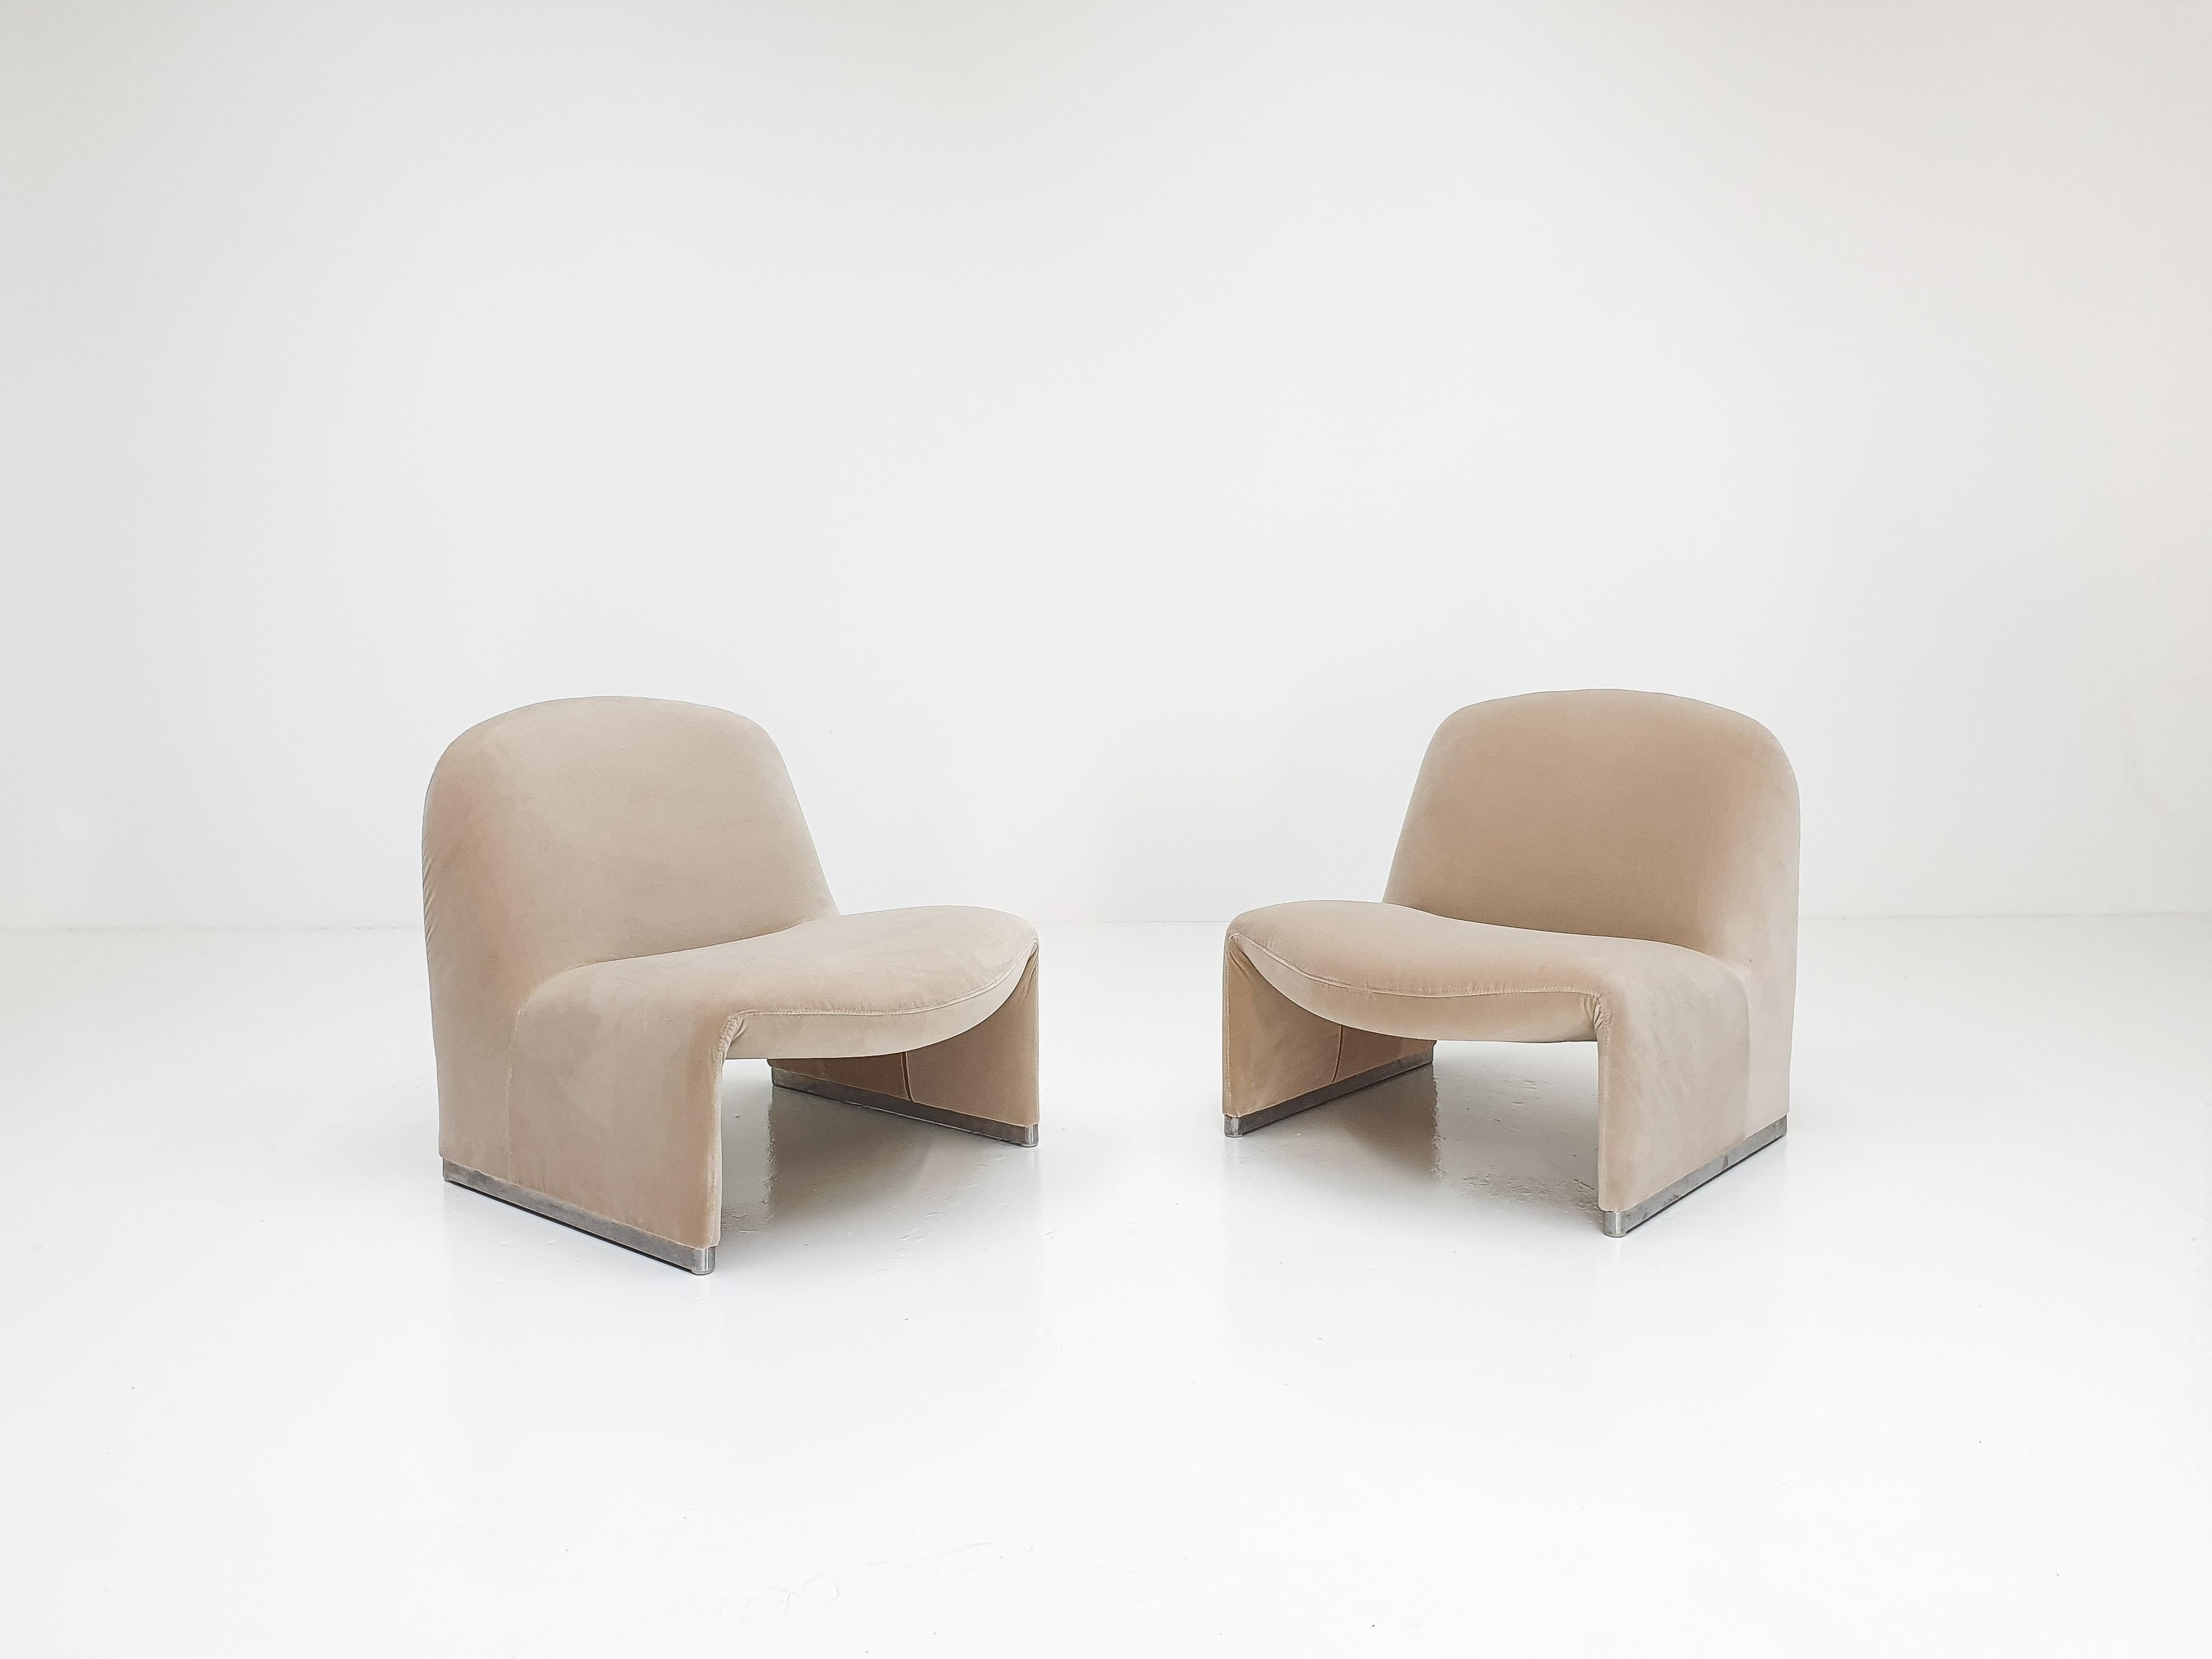 A pair of Giancarlo Piretti “Alky” chairs newly upholstered in Designers Guild linen colored velvet. 

Manufactured by Artifort in the 1970s.

The organic shape offers a minimal appearance but also comfort.

Foam restored where required and